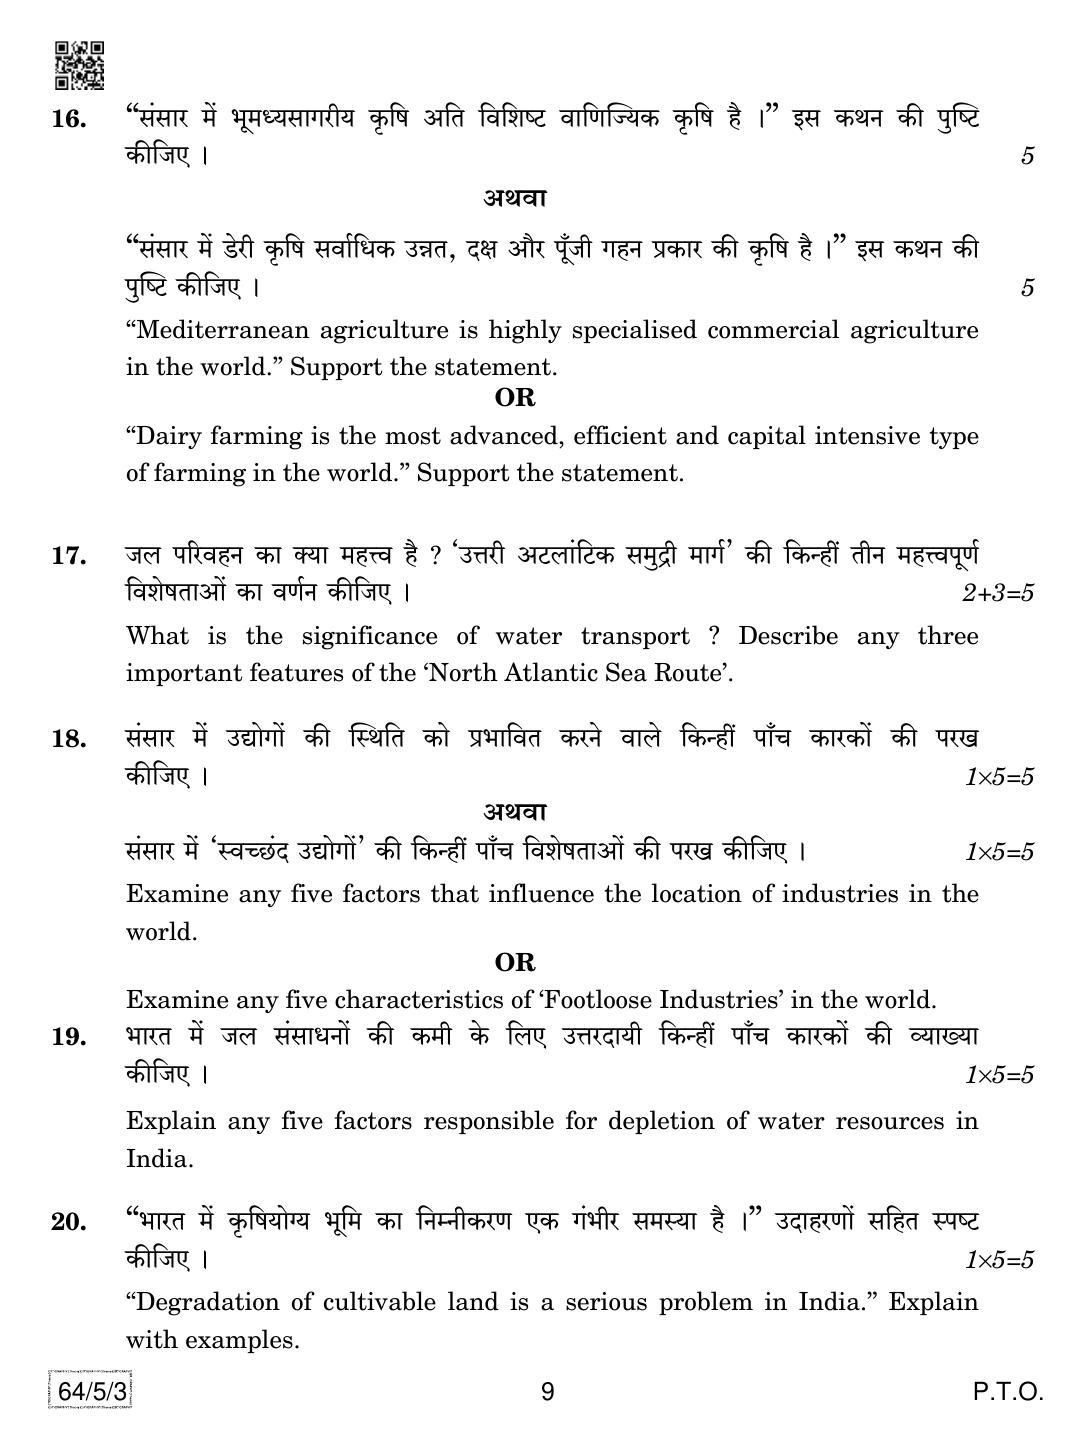 CBSE Class 12 64-5-3 Geography 2019 Question Paper - Page 9